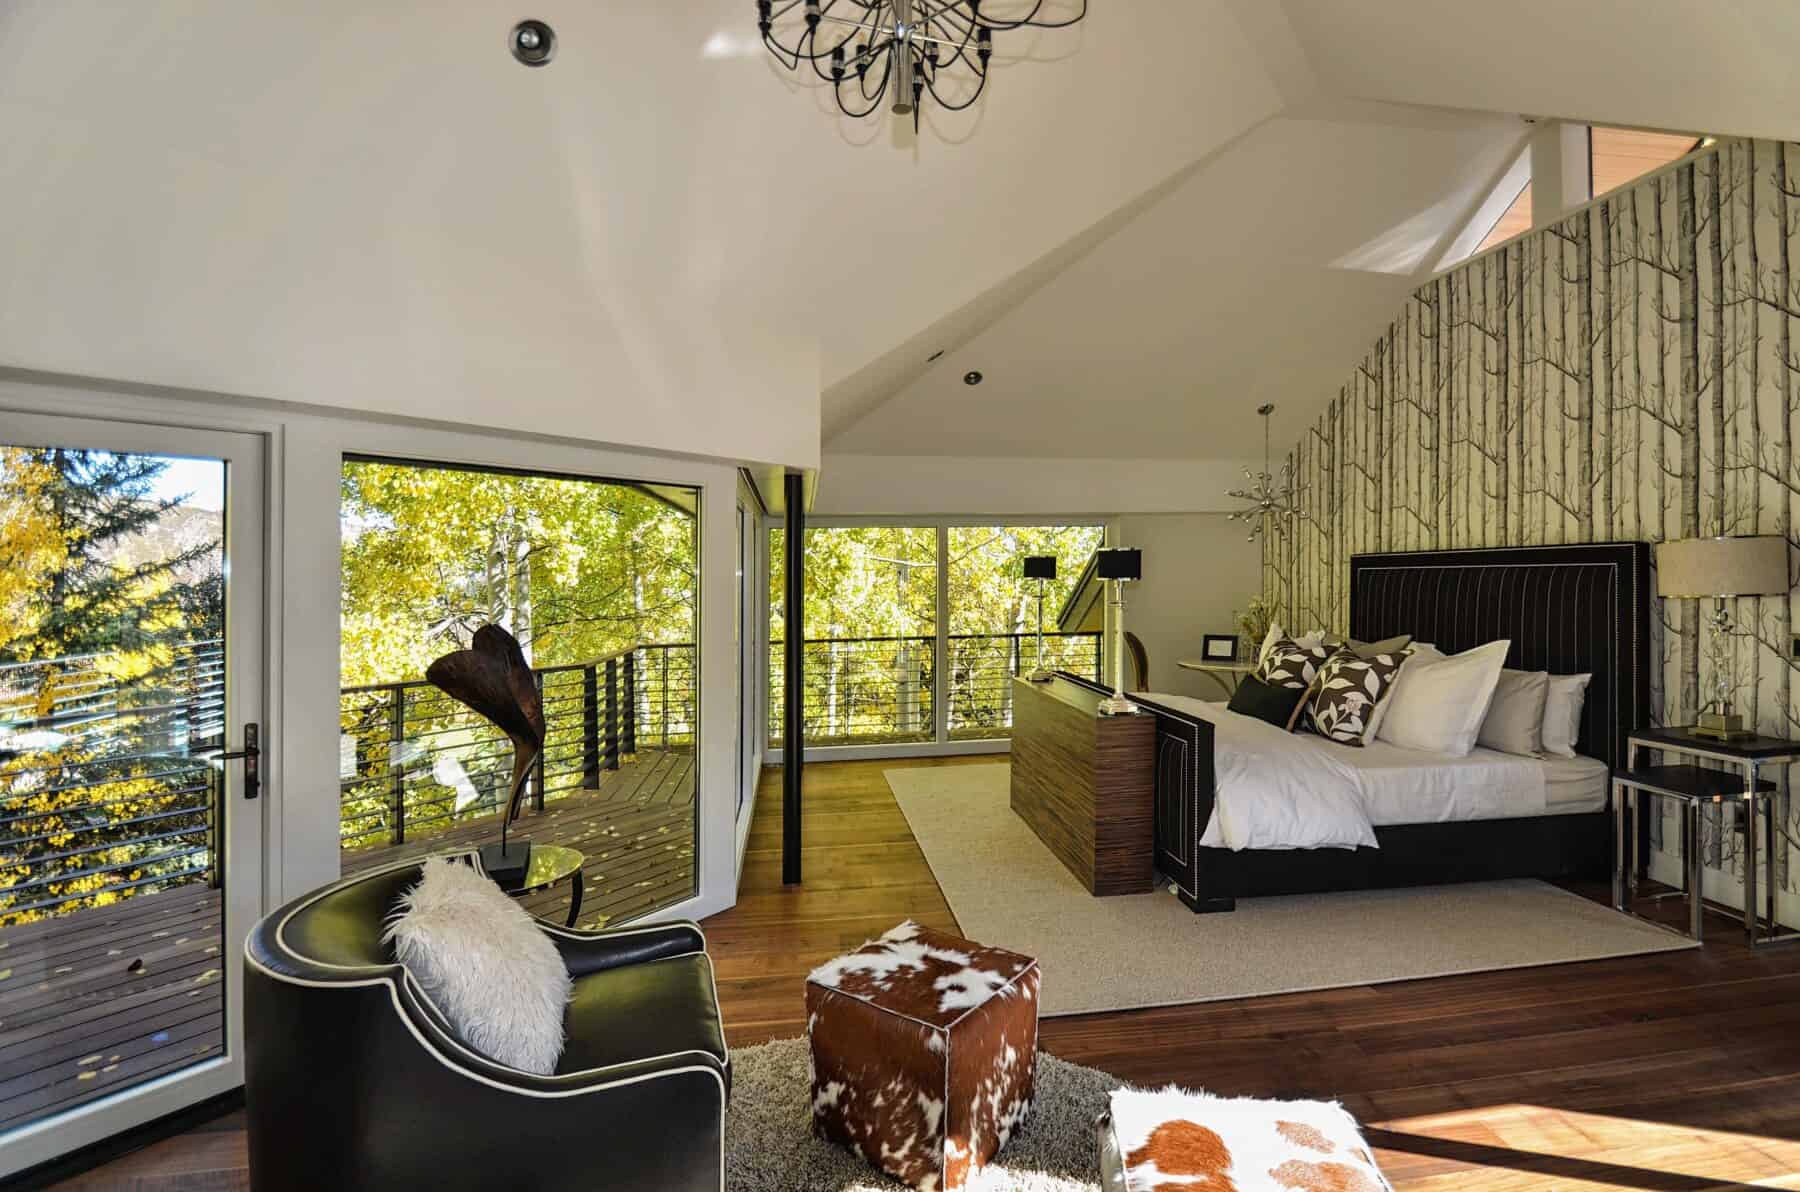 Furnished Bedroom in Custom Home by Aspen, Colorado Custom Home. Luxury Home Building Interiors